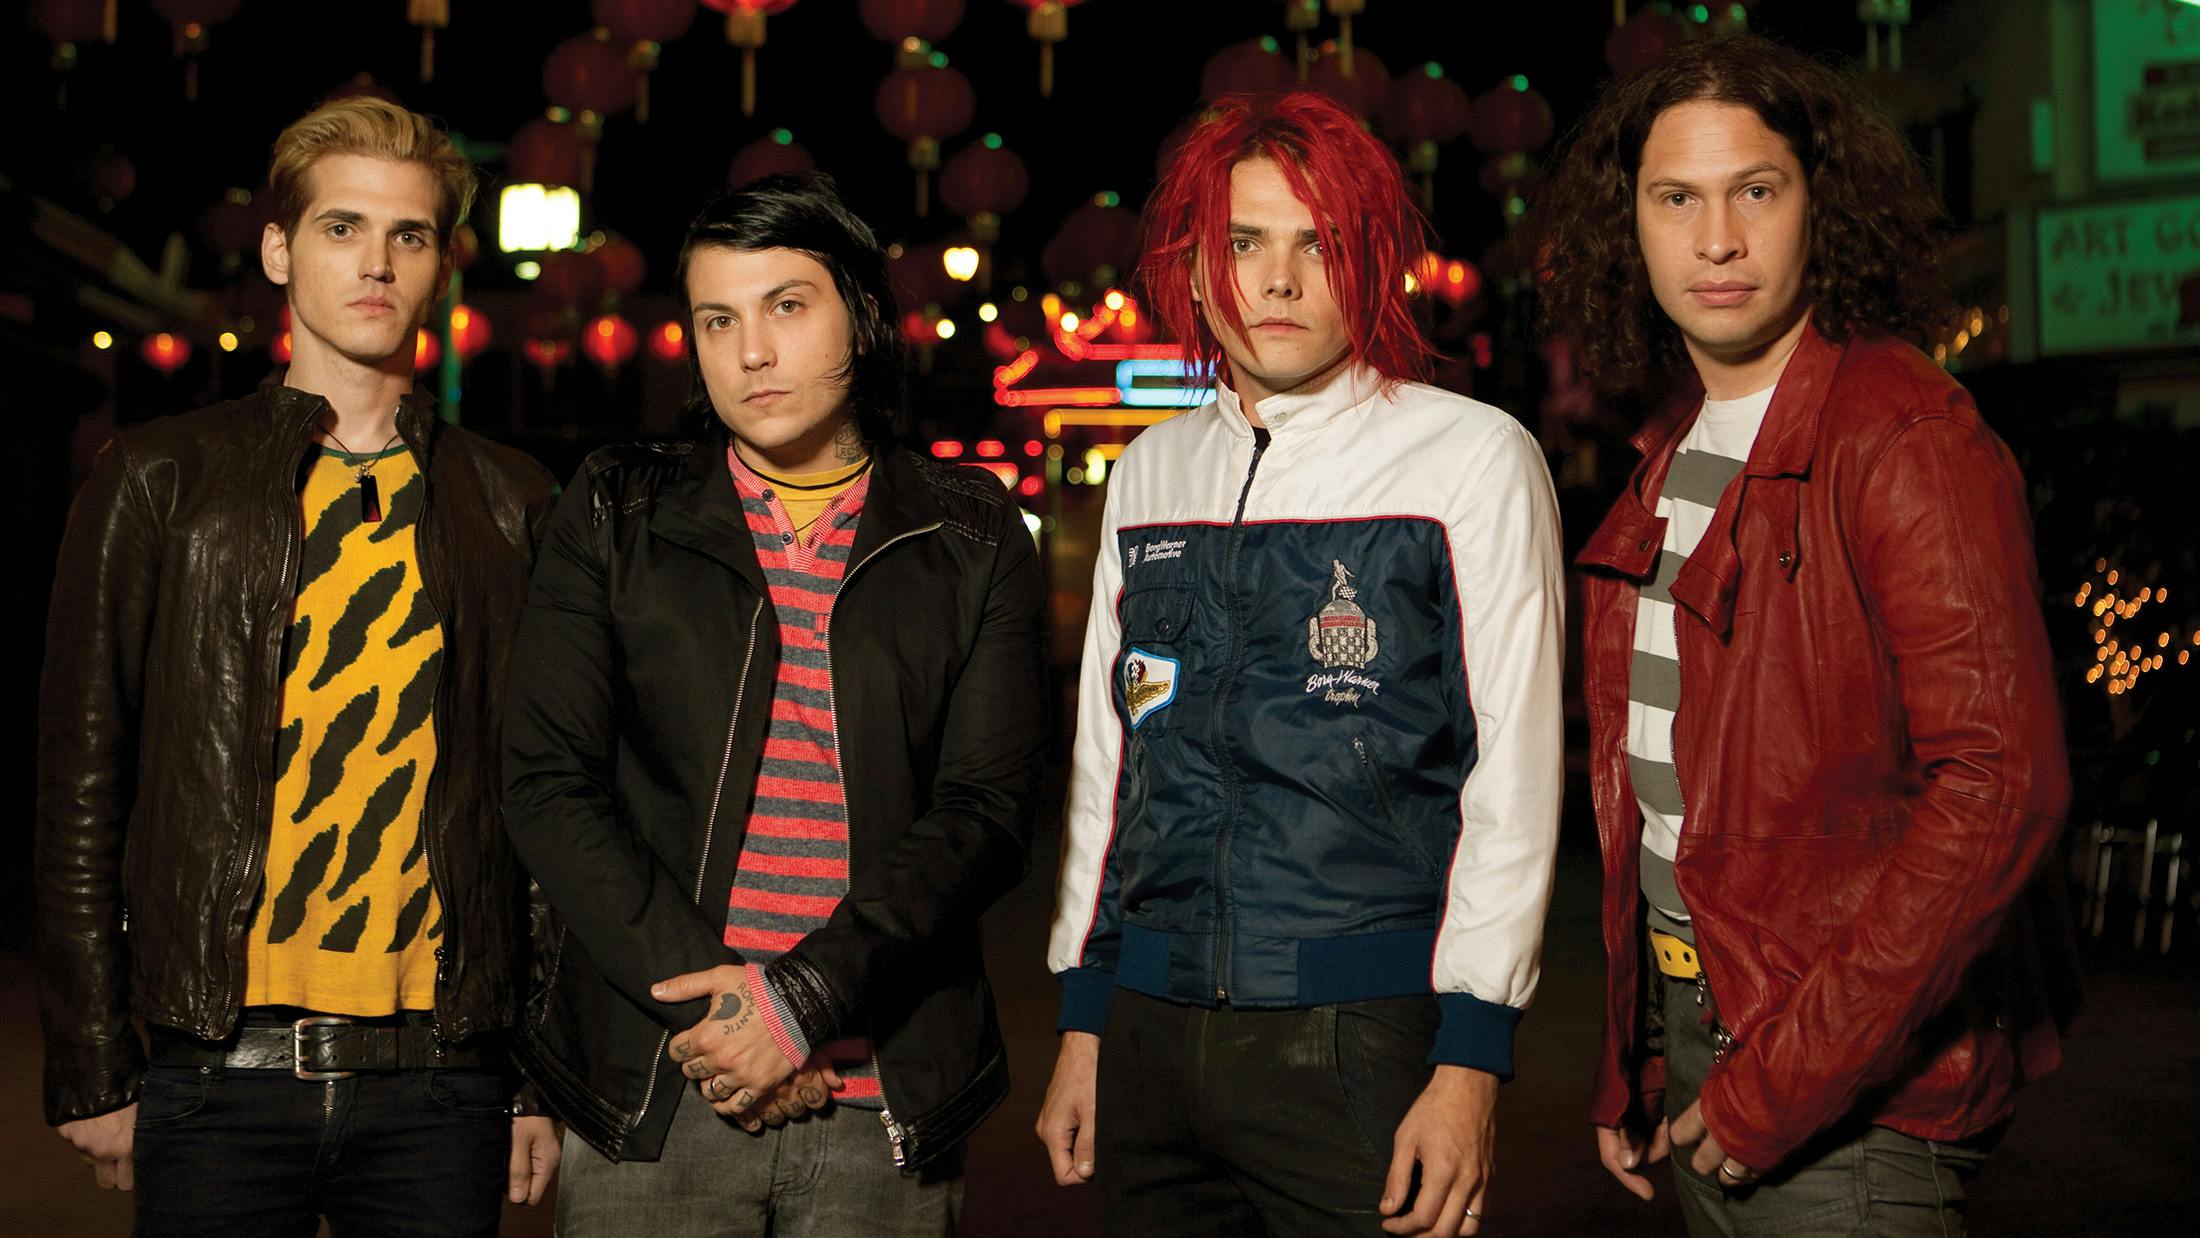 The My Chemical Romance Reunion: A Timeline Of Events